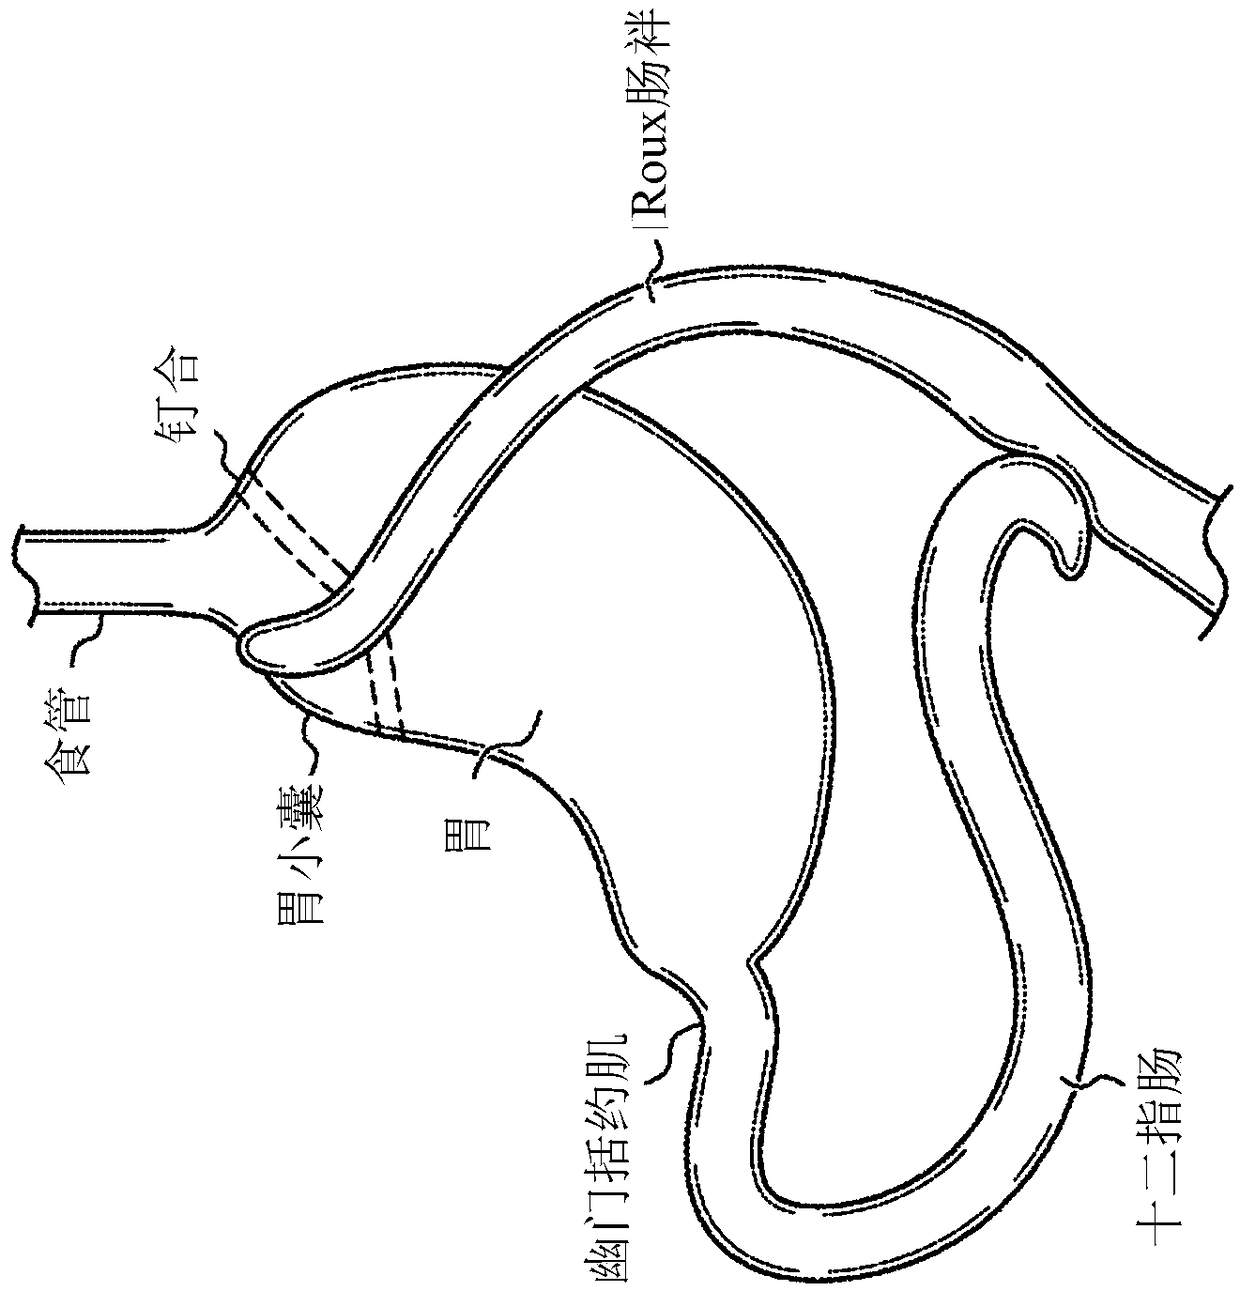 Device for bariatric stent allowing normal function of pyloric sphincter